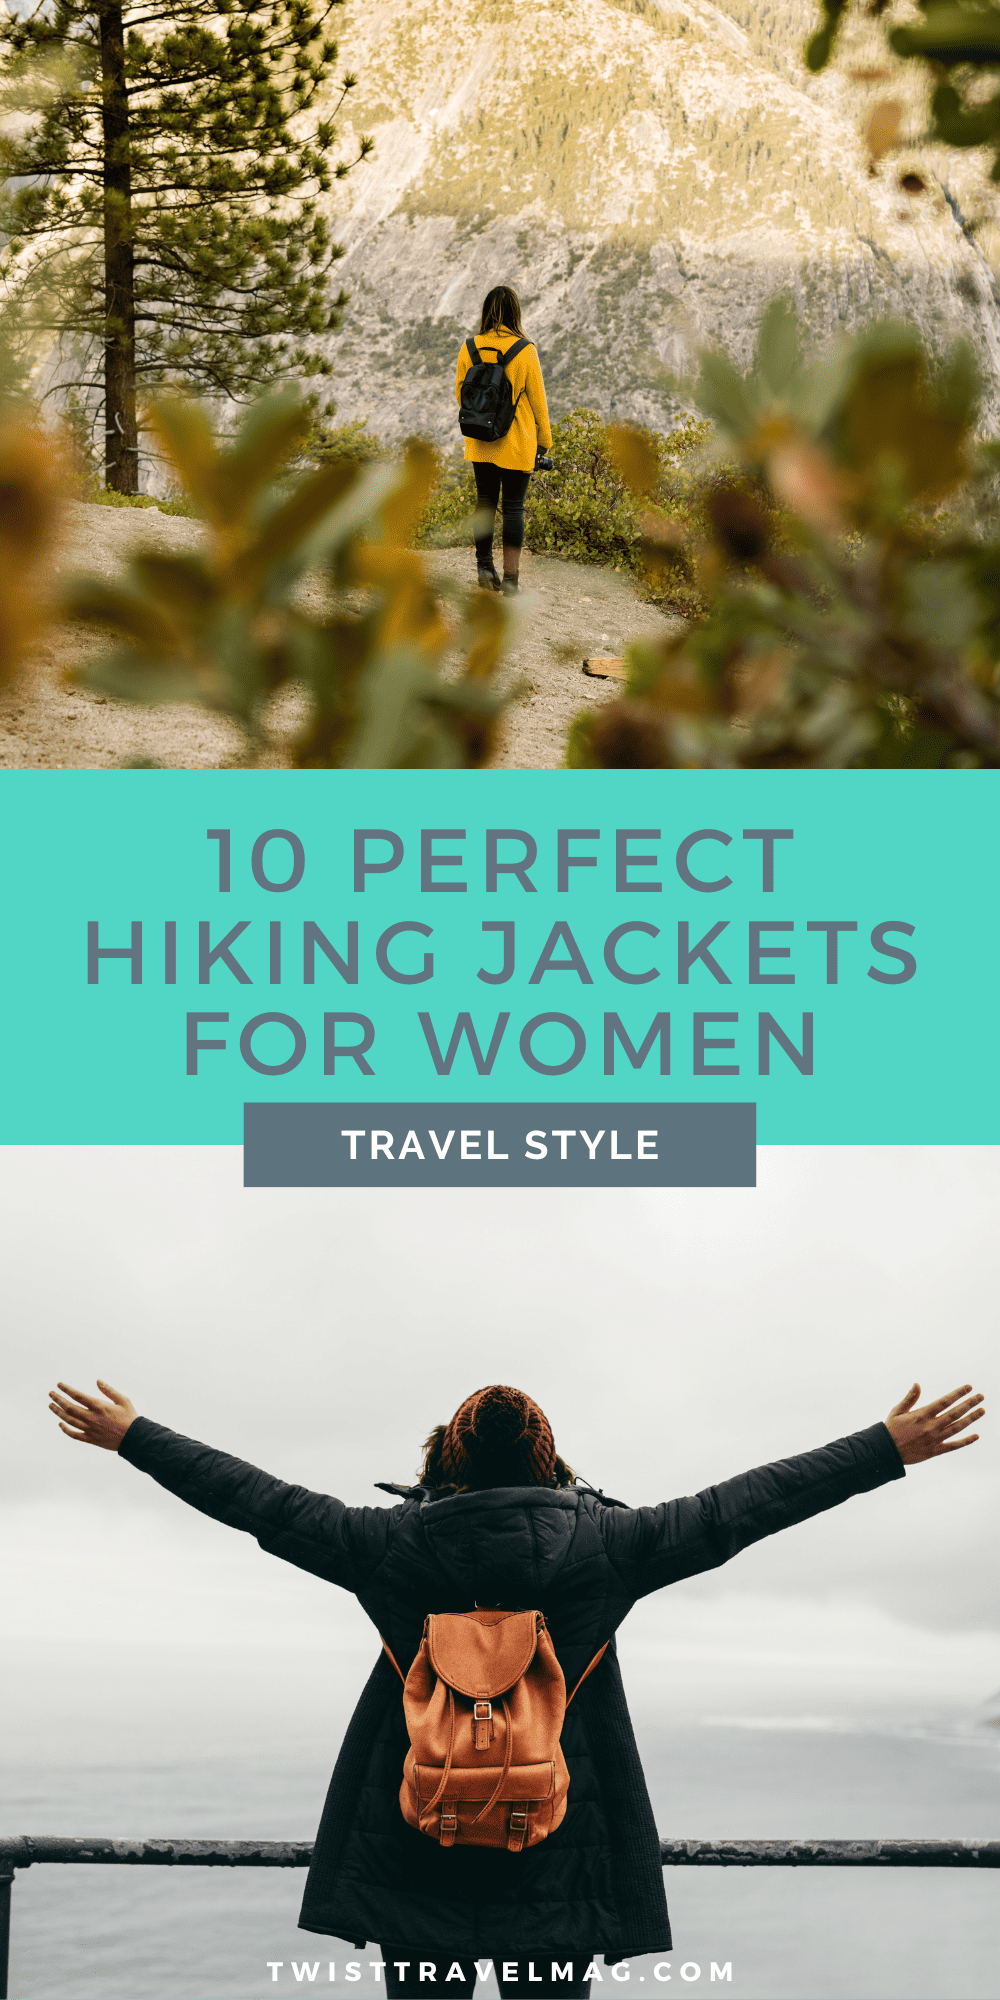 10 Outstanding and Comfortable Hiking Jackets for Women